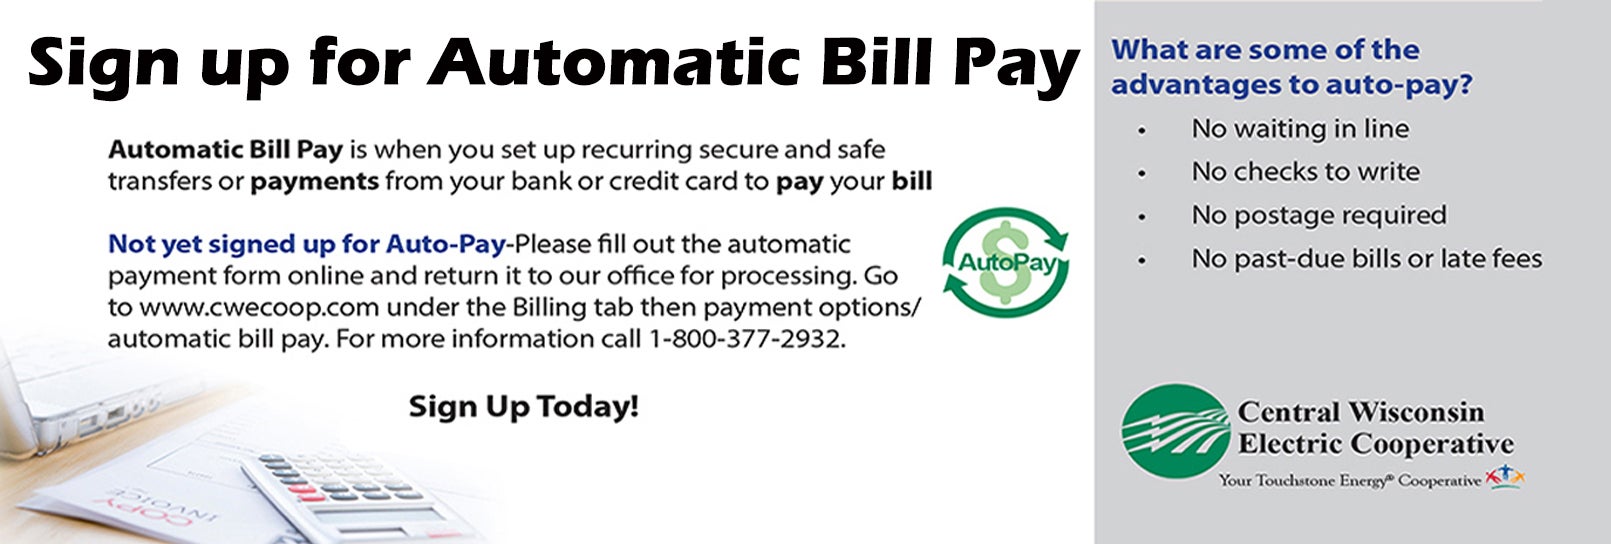 Automatic Bill Pay Sign Up